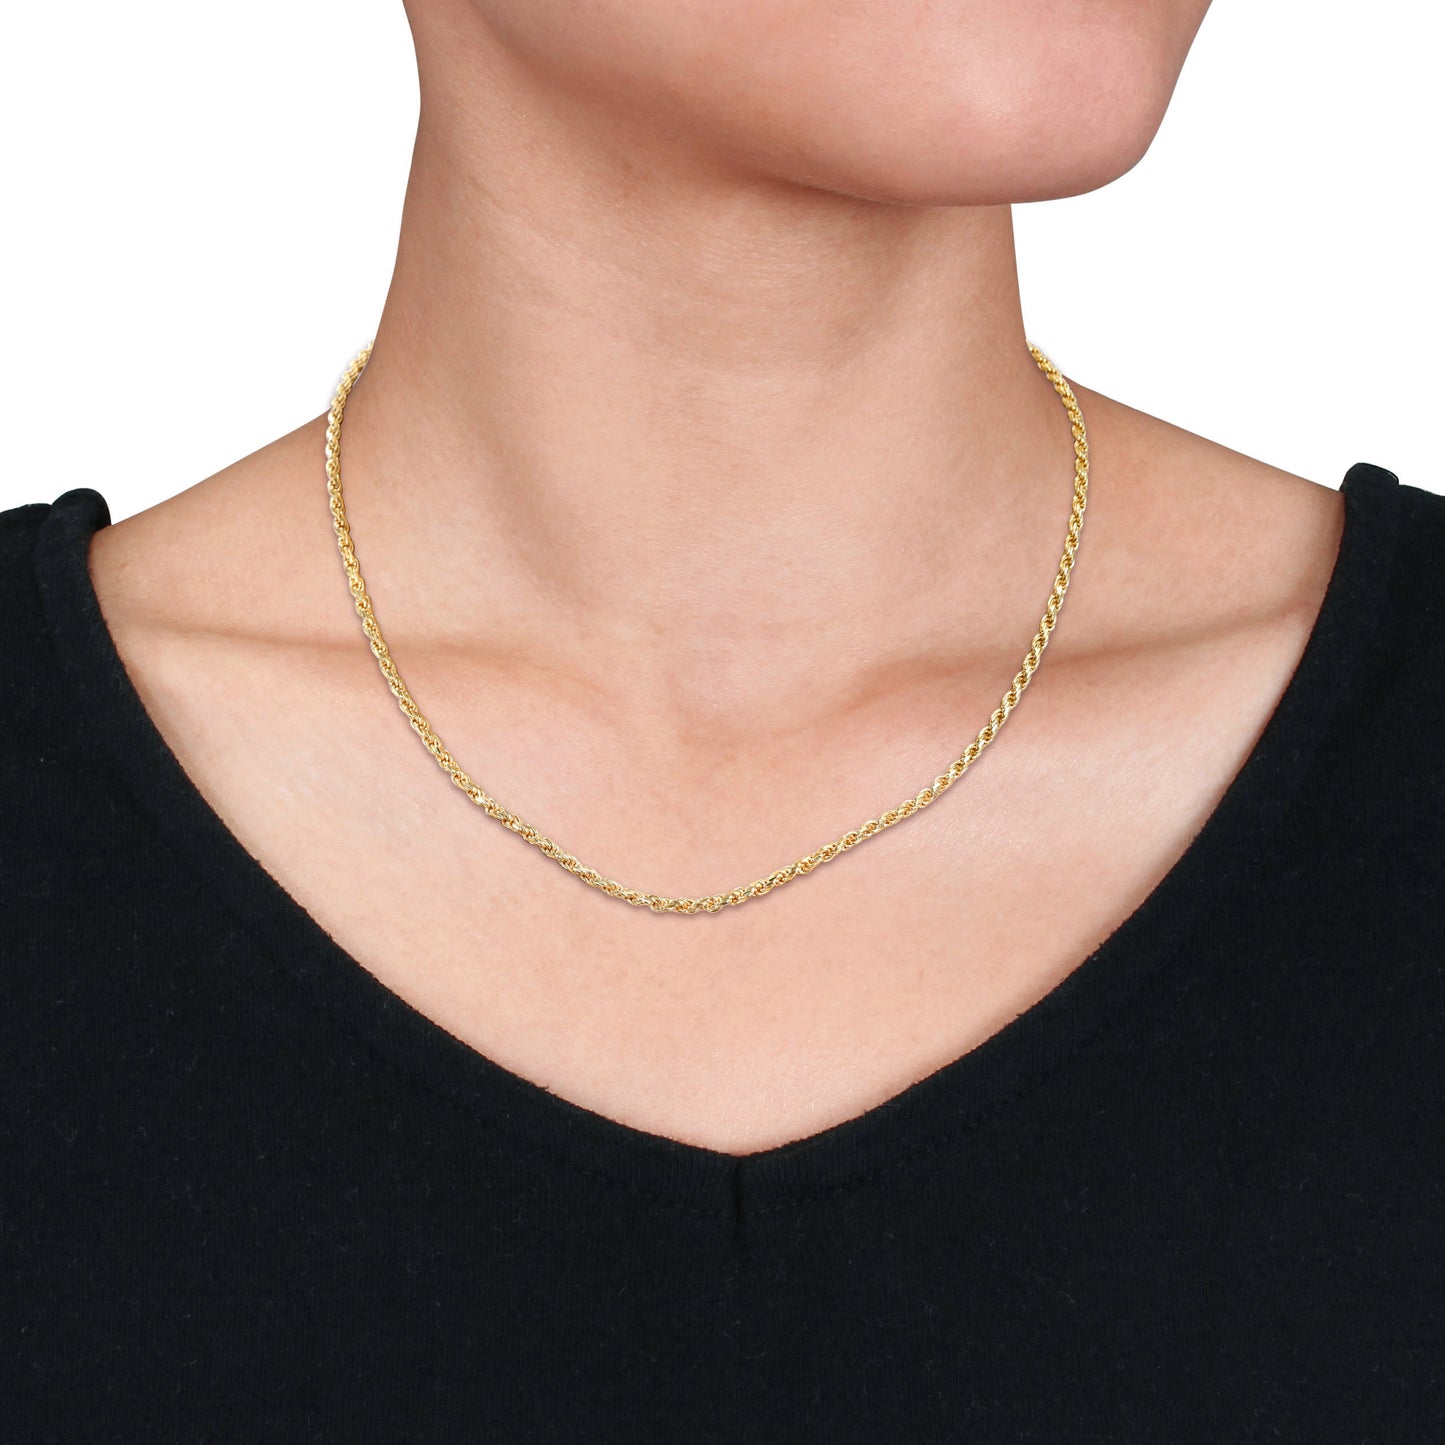 18k Yellow Gold Plated Rope Chain in 2.2mm